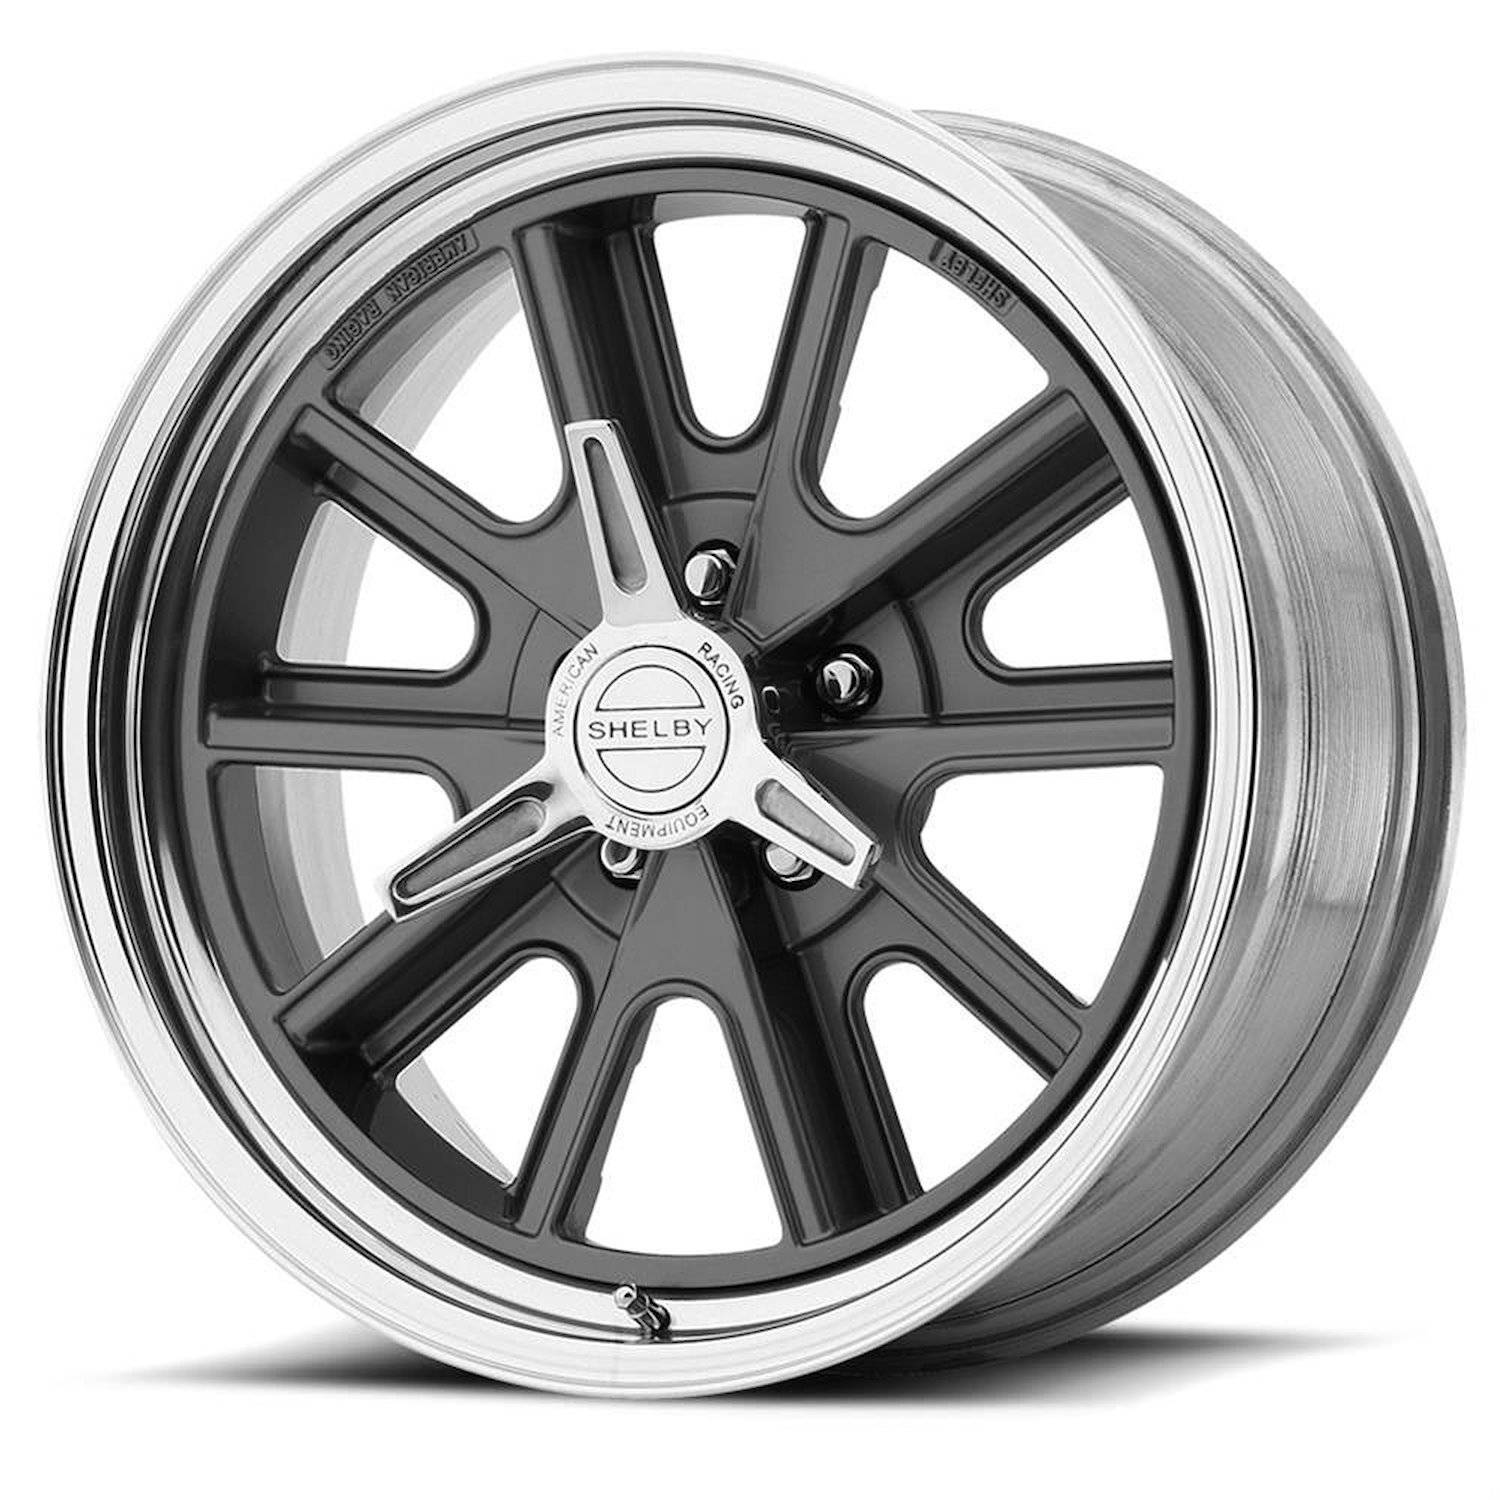 AMERICAN RACING 427 SHELBY COBRA TWO-PIECE MAG GRAY CENTER POLISHED BARREL 17 x 9.5 5x4.5 -12 4.78